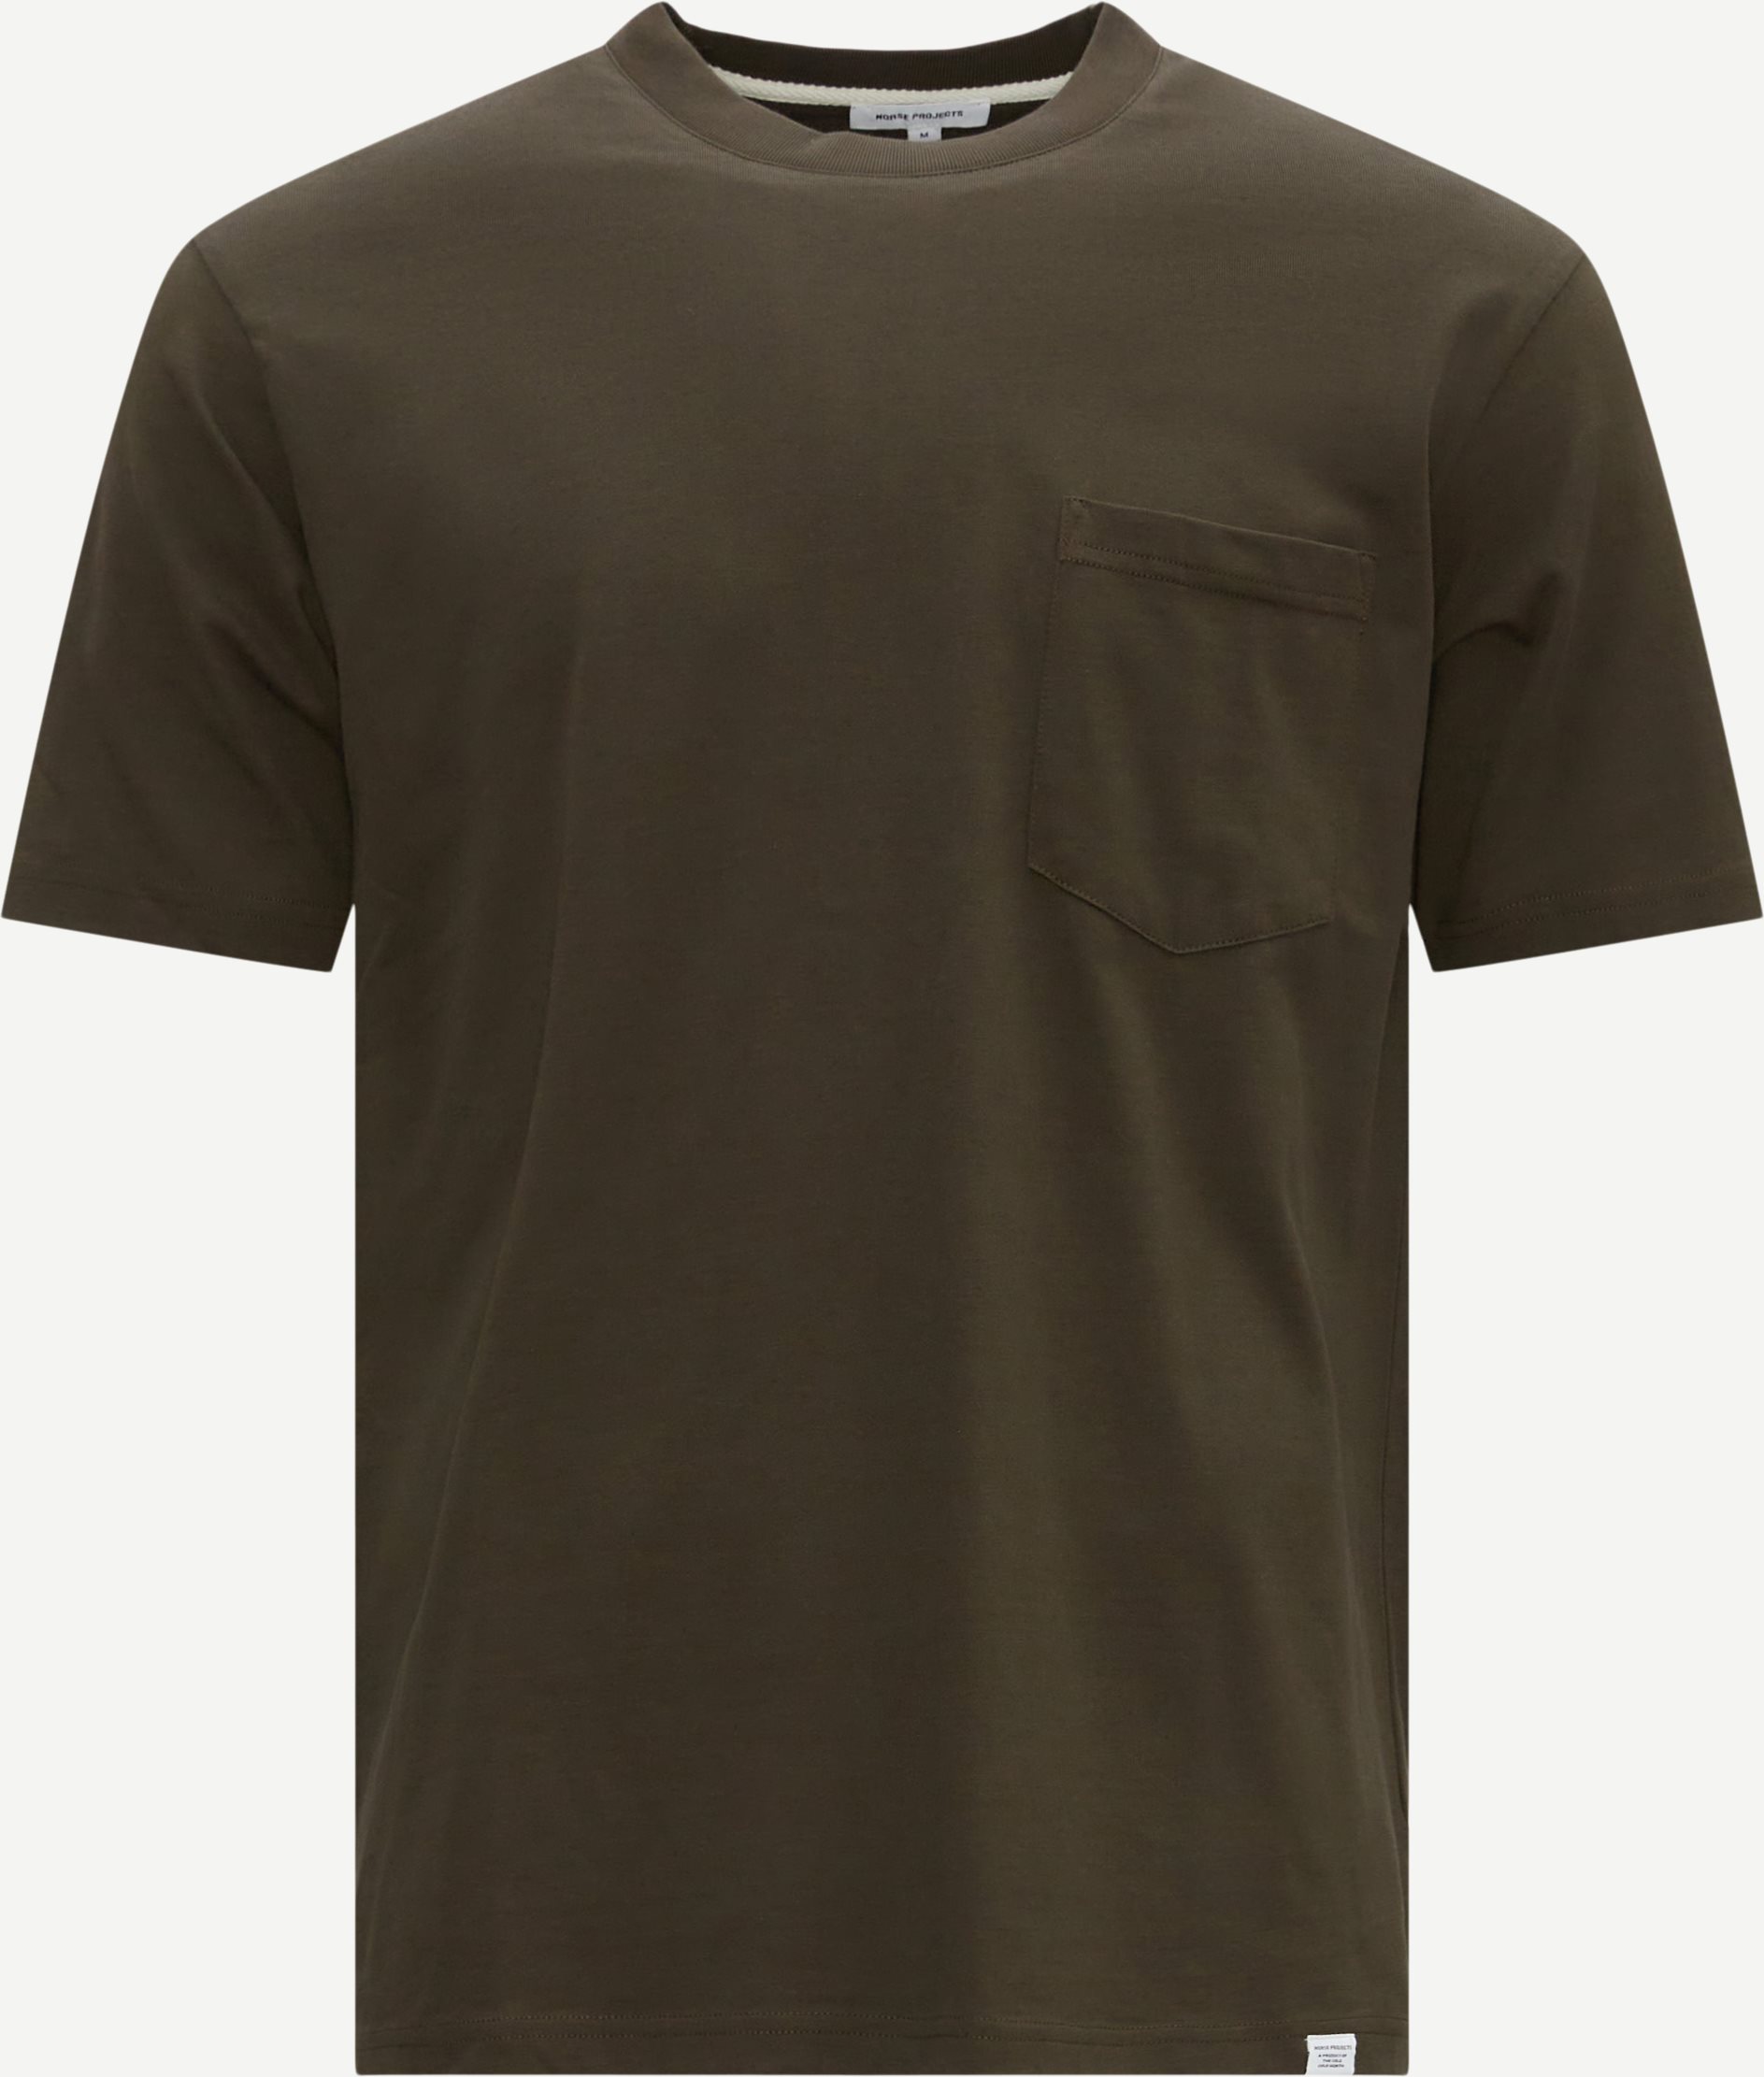 Norse Projects T-shirts N01-0553 JOHANNES STANDARD POCKET Army